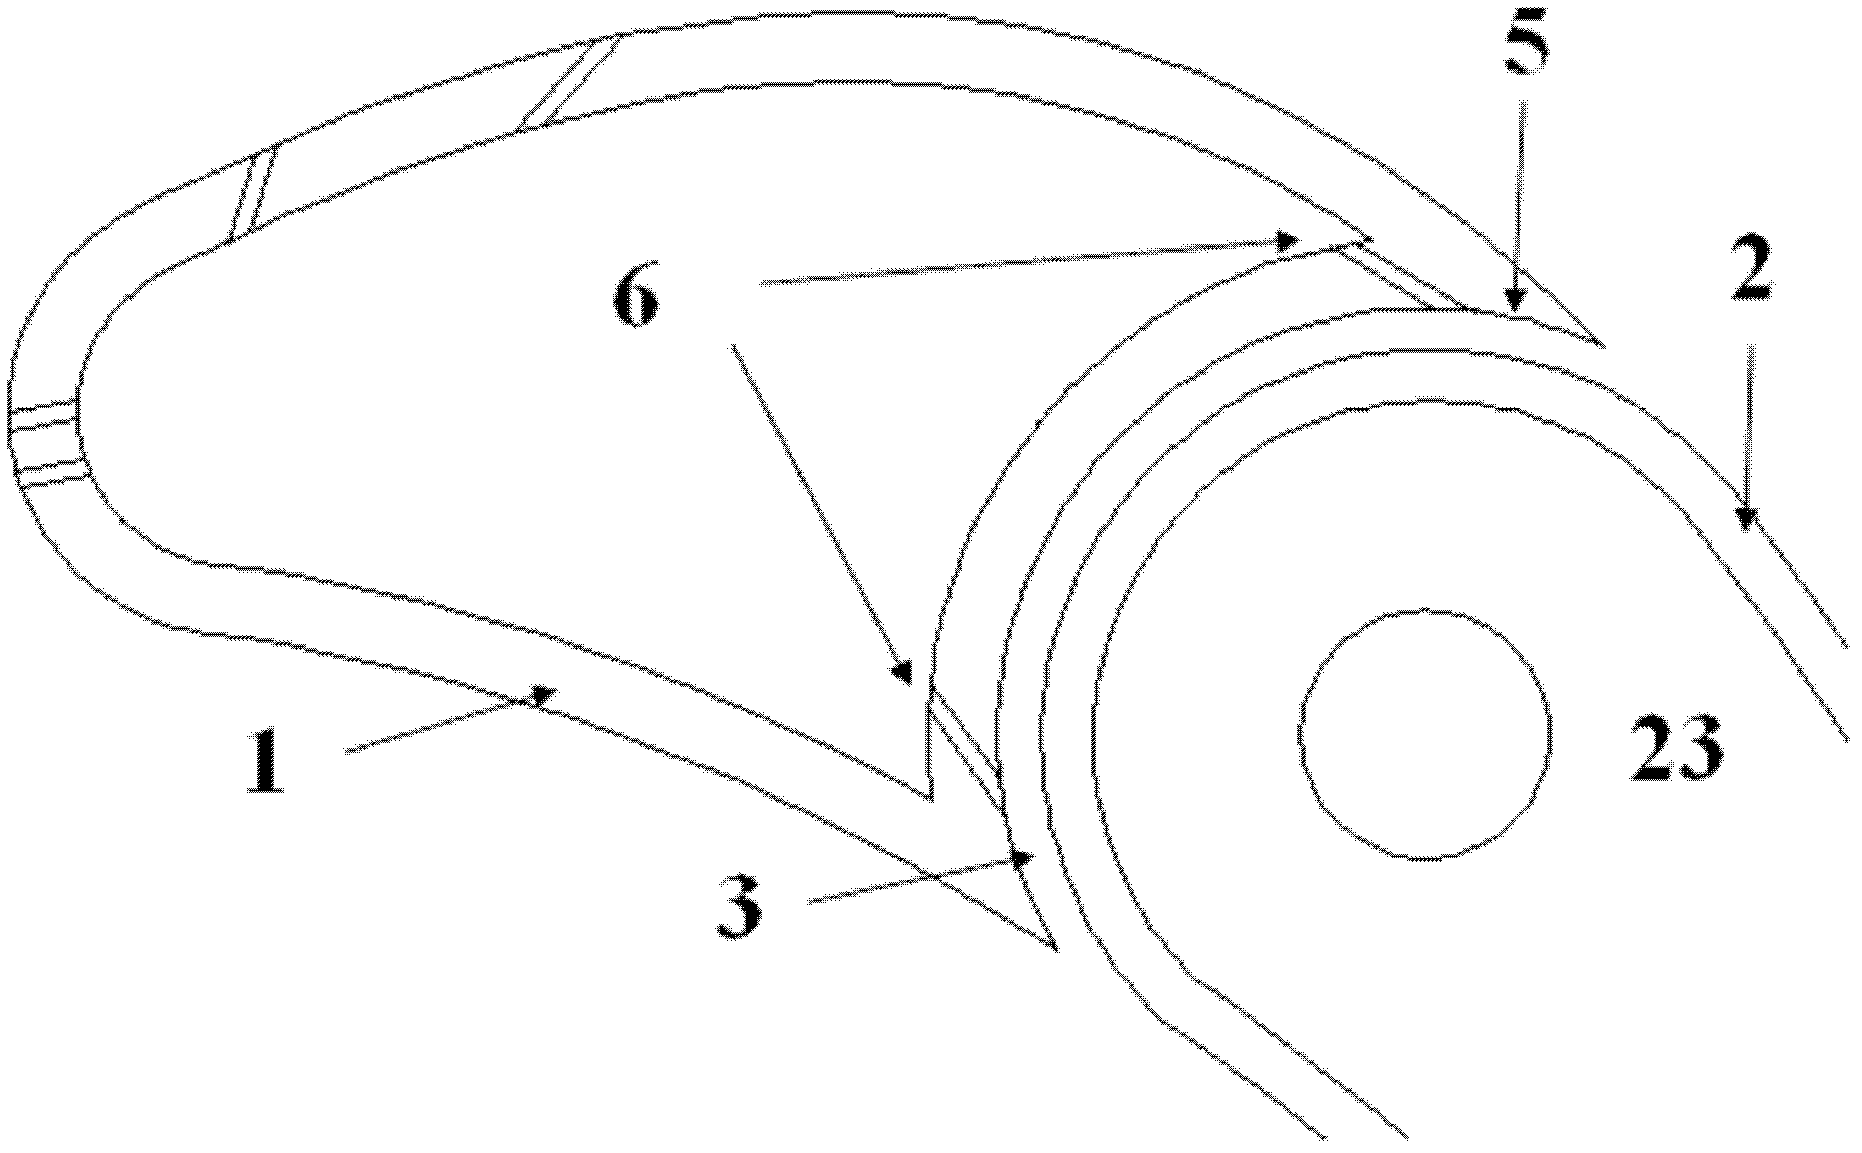 Cooling method used for segmented geometric adjustment of guide vanes of gas turbine